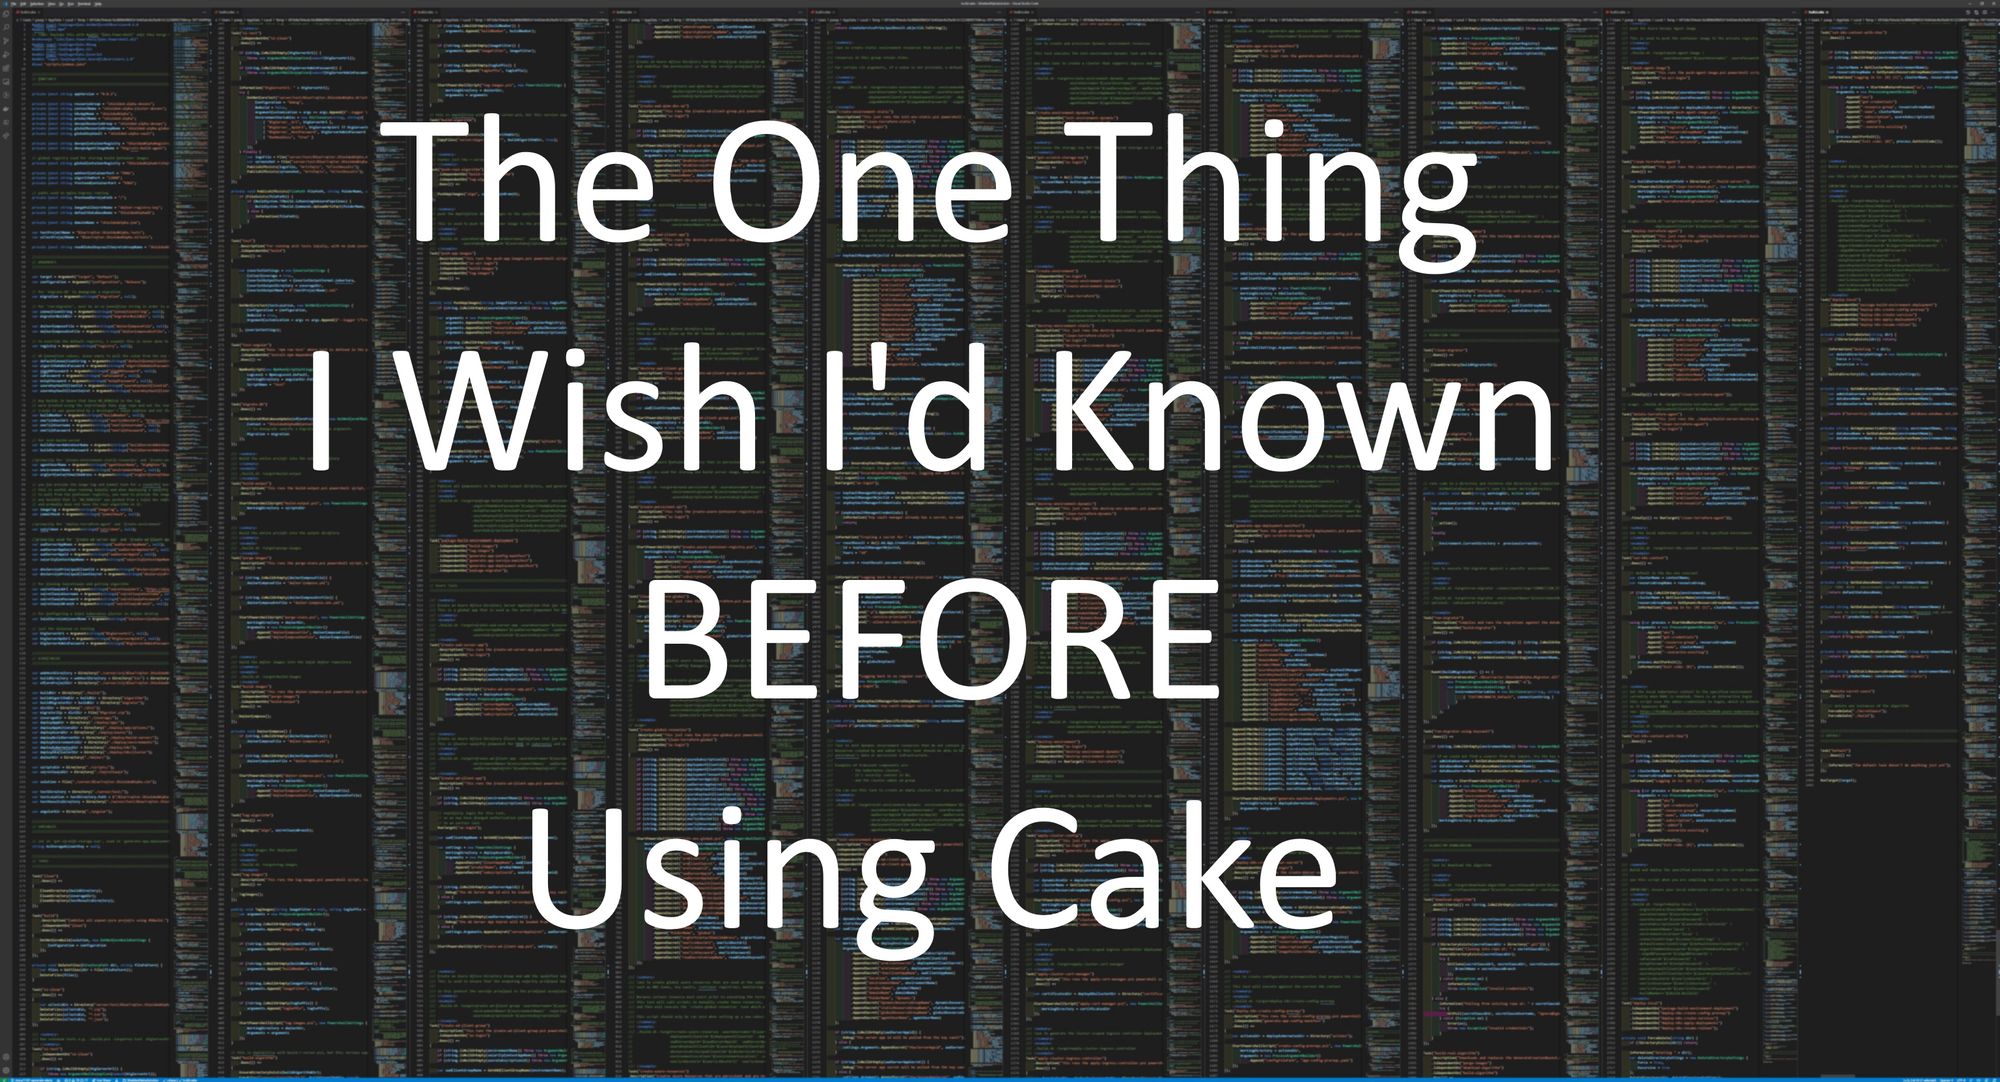 The One Thing I Wish I'd Known Before Using Cake